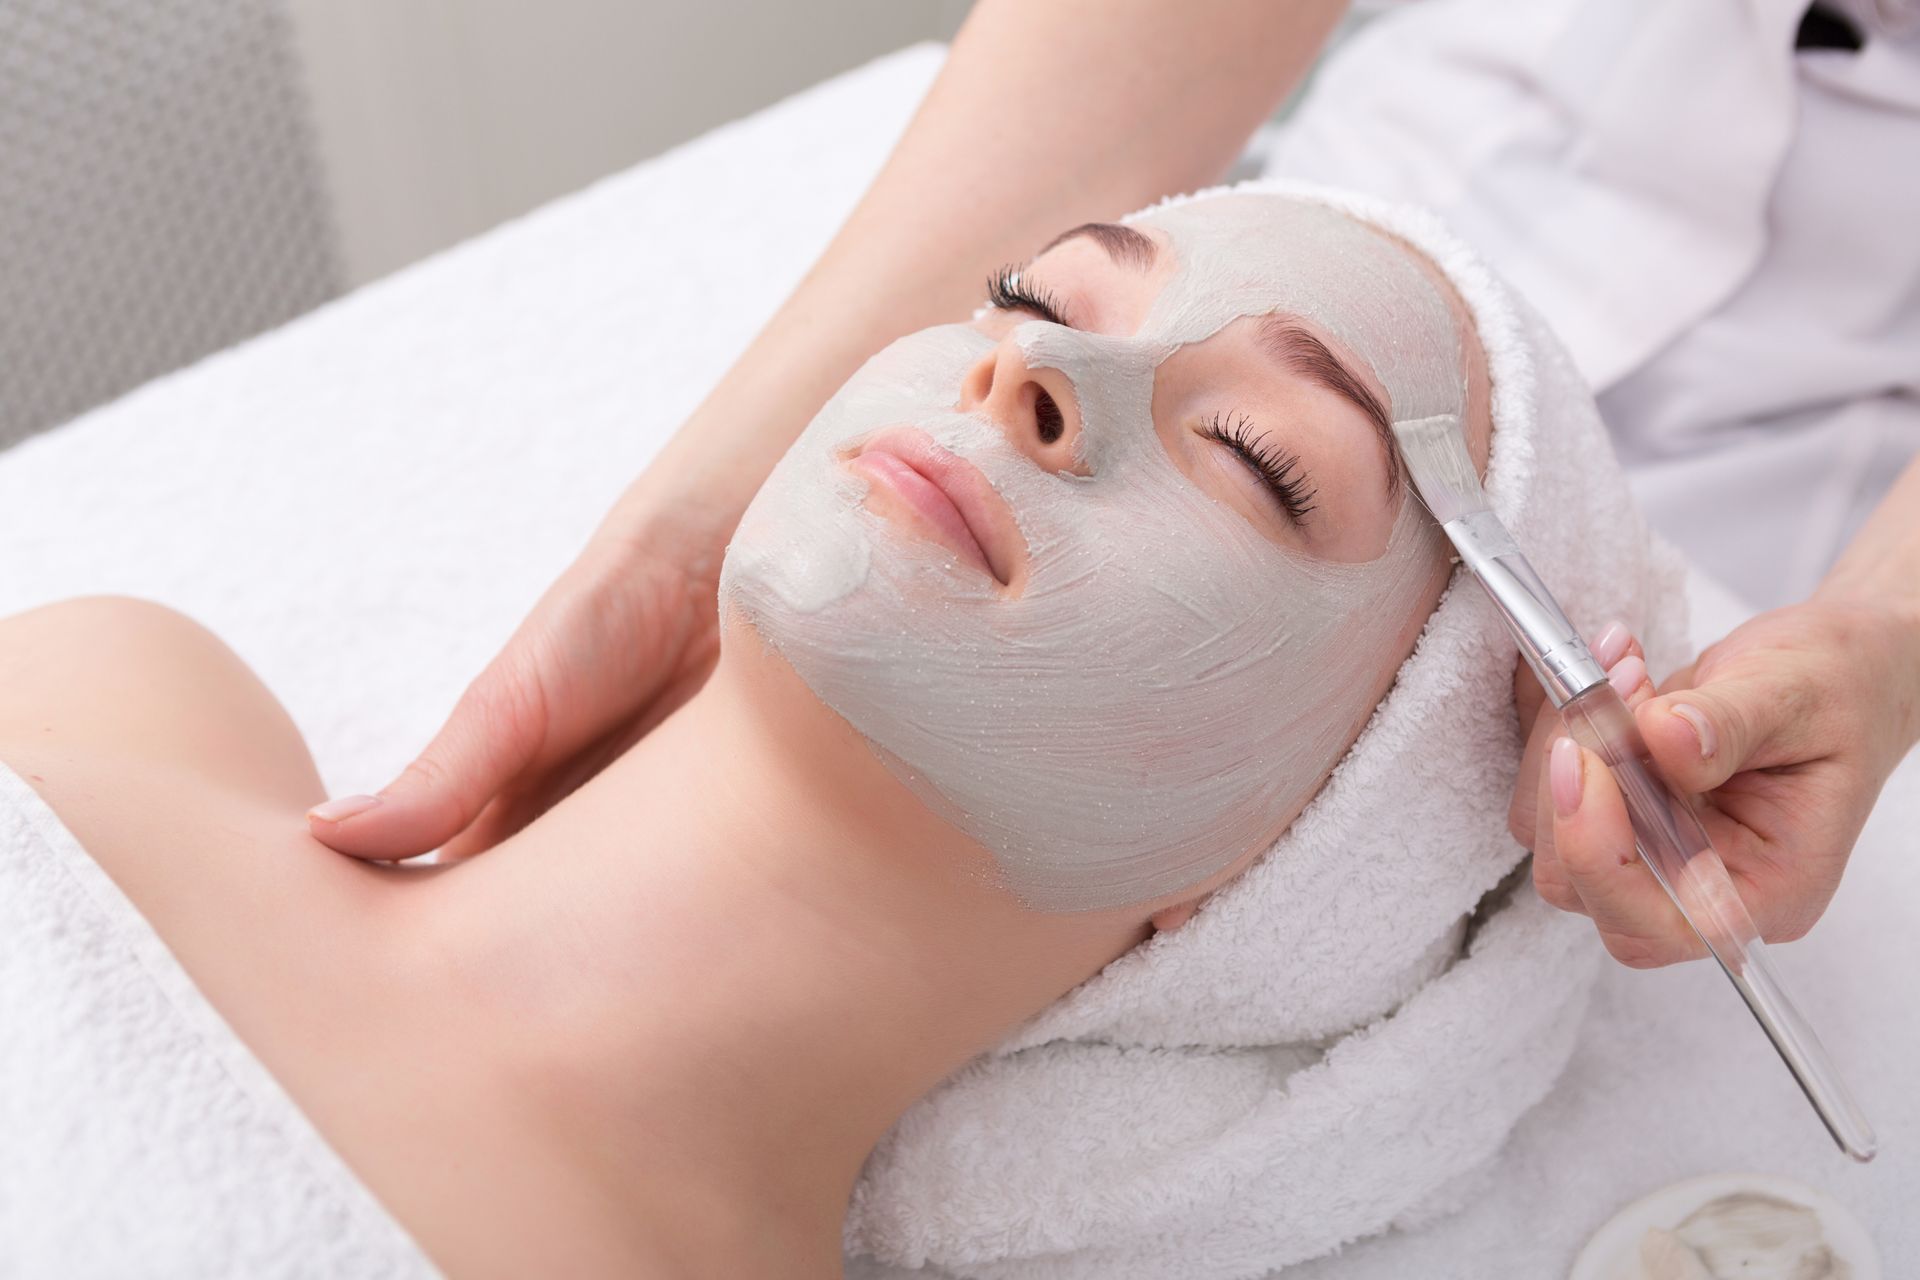 a woman is getting a facial treatment at a spa